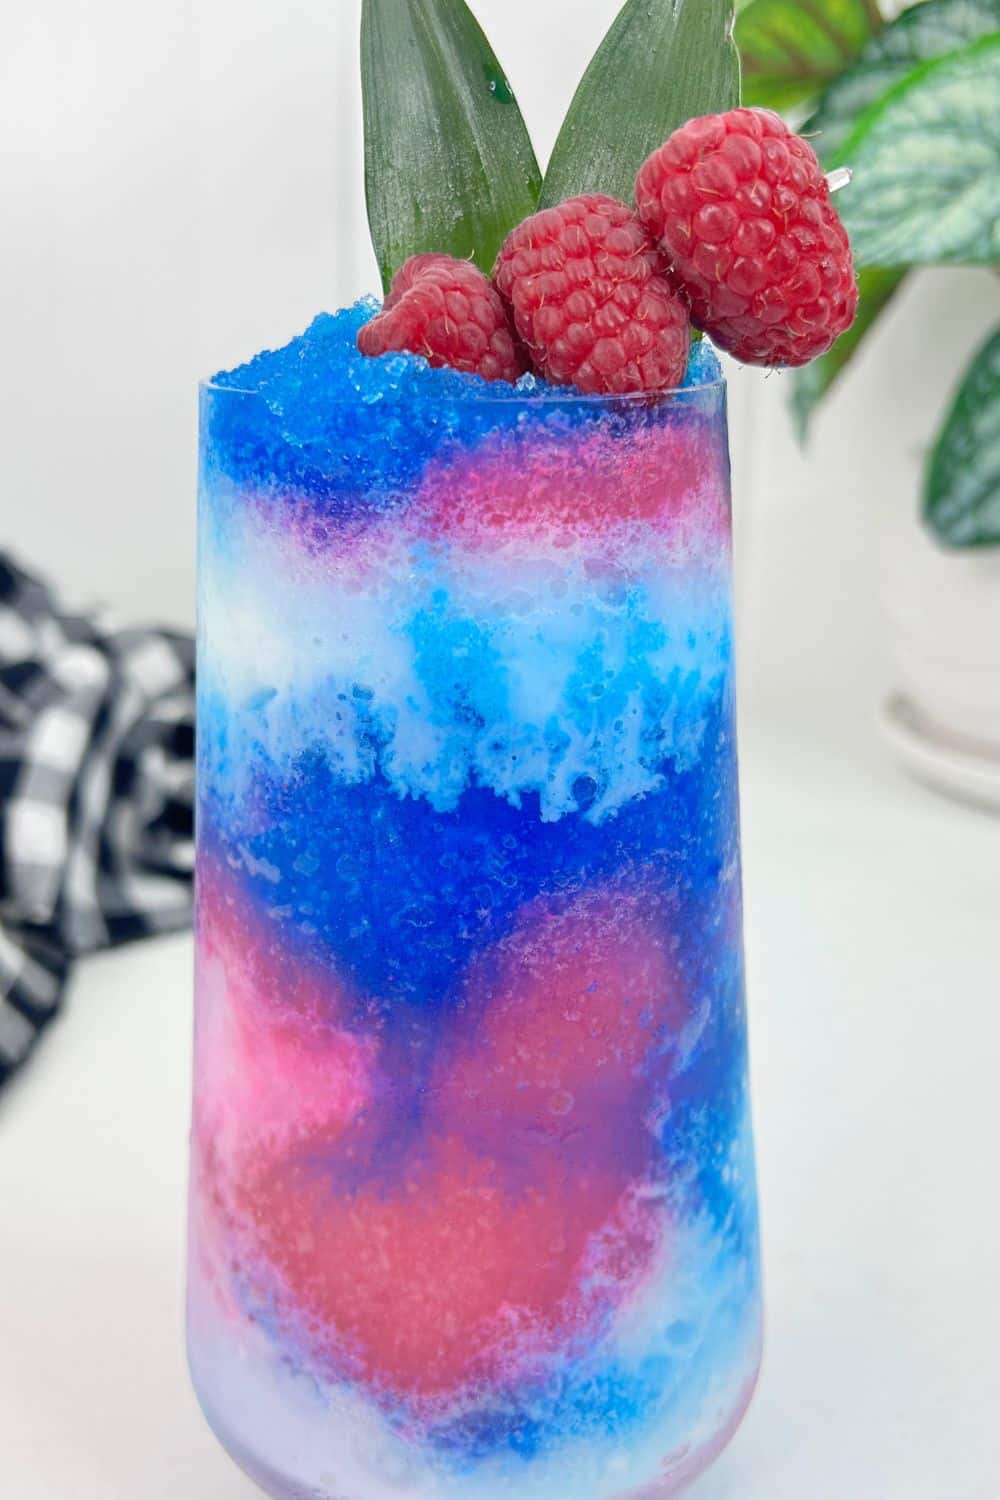 Blue Raspberry Pina Colada on a table with raspberries garnished at top of glass